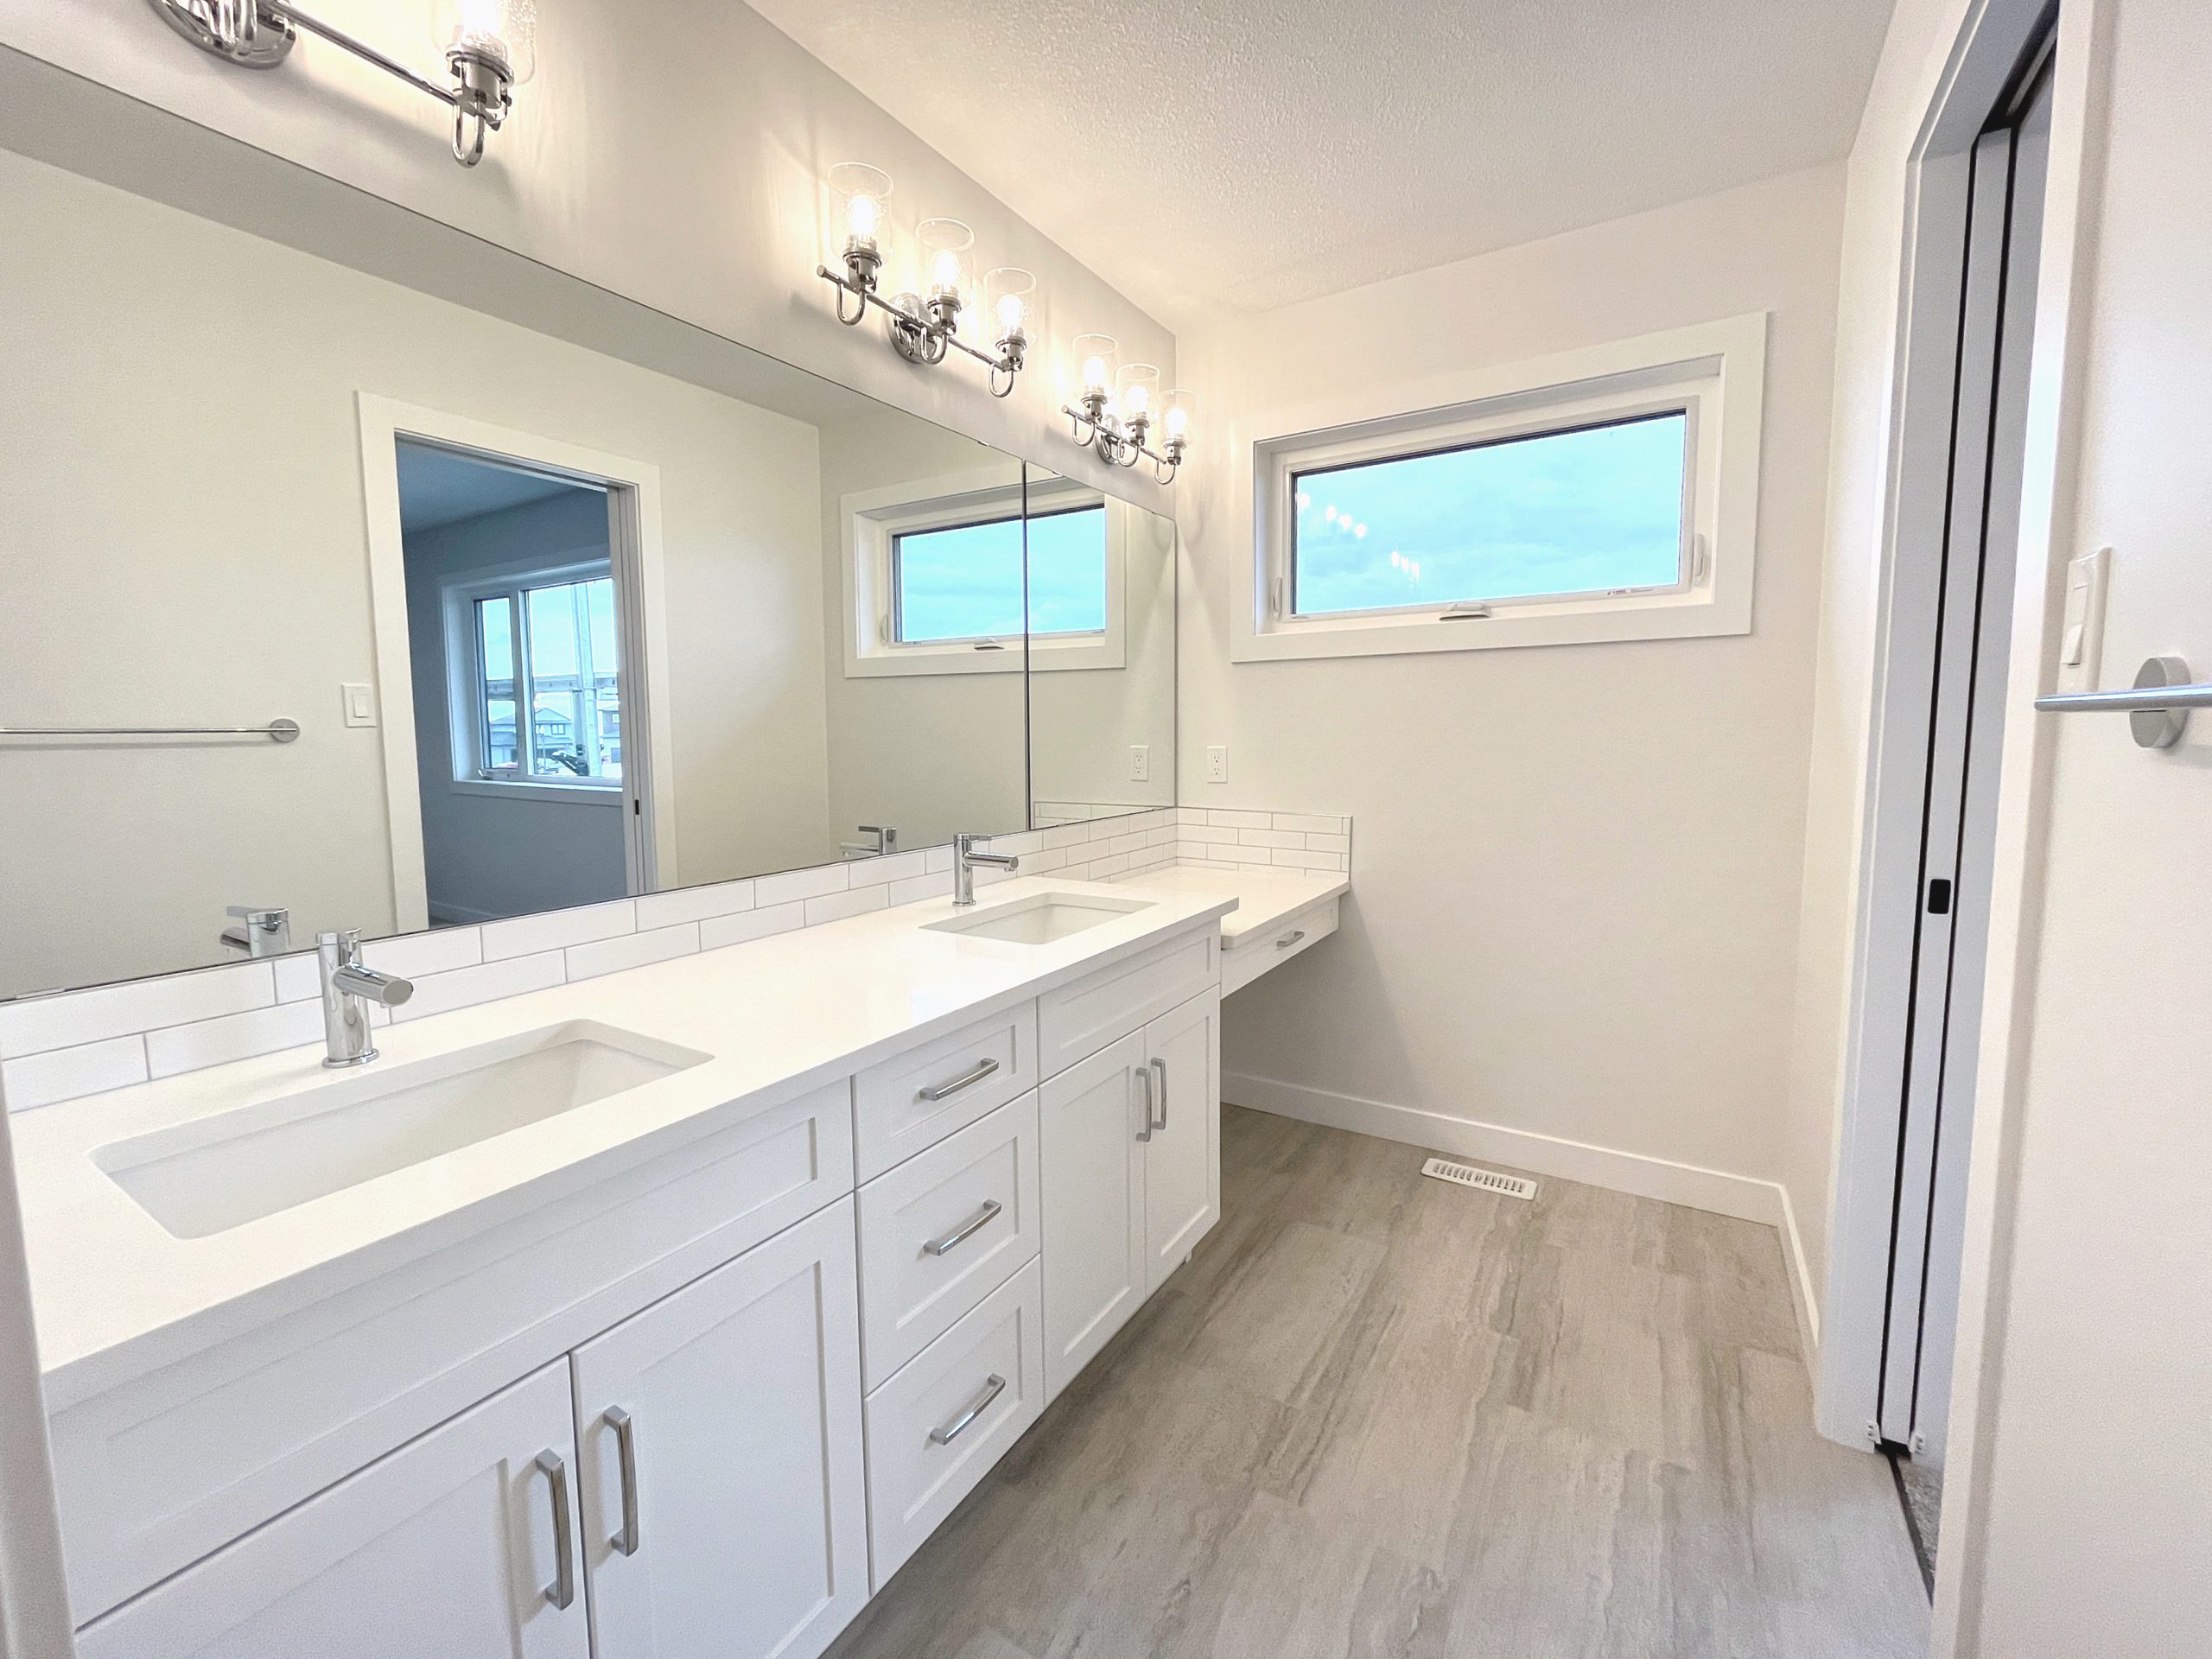 Primary bathroom with a double sink, makeup counter and a large mirror.